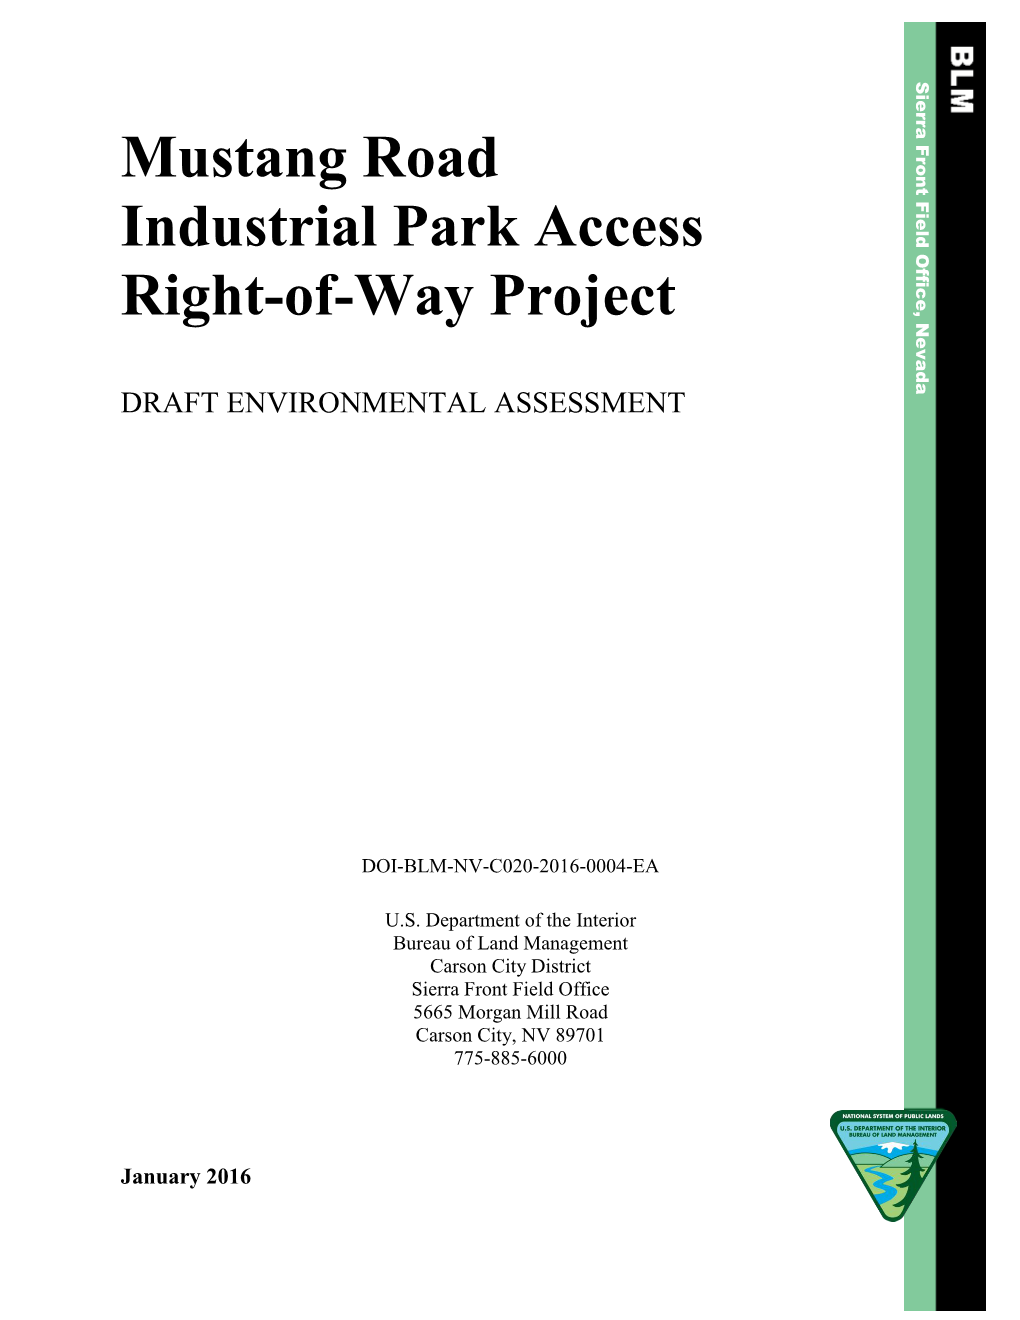 Mustang Road Industrial Park Access Right-Of-Way